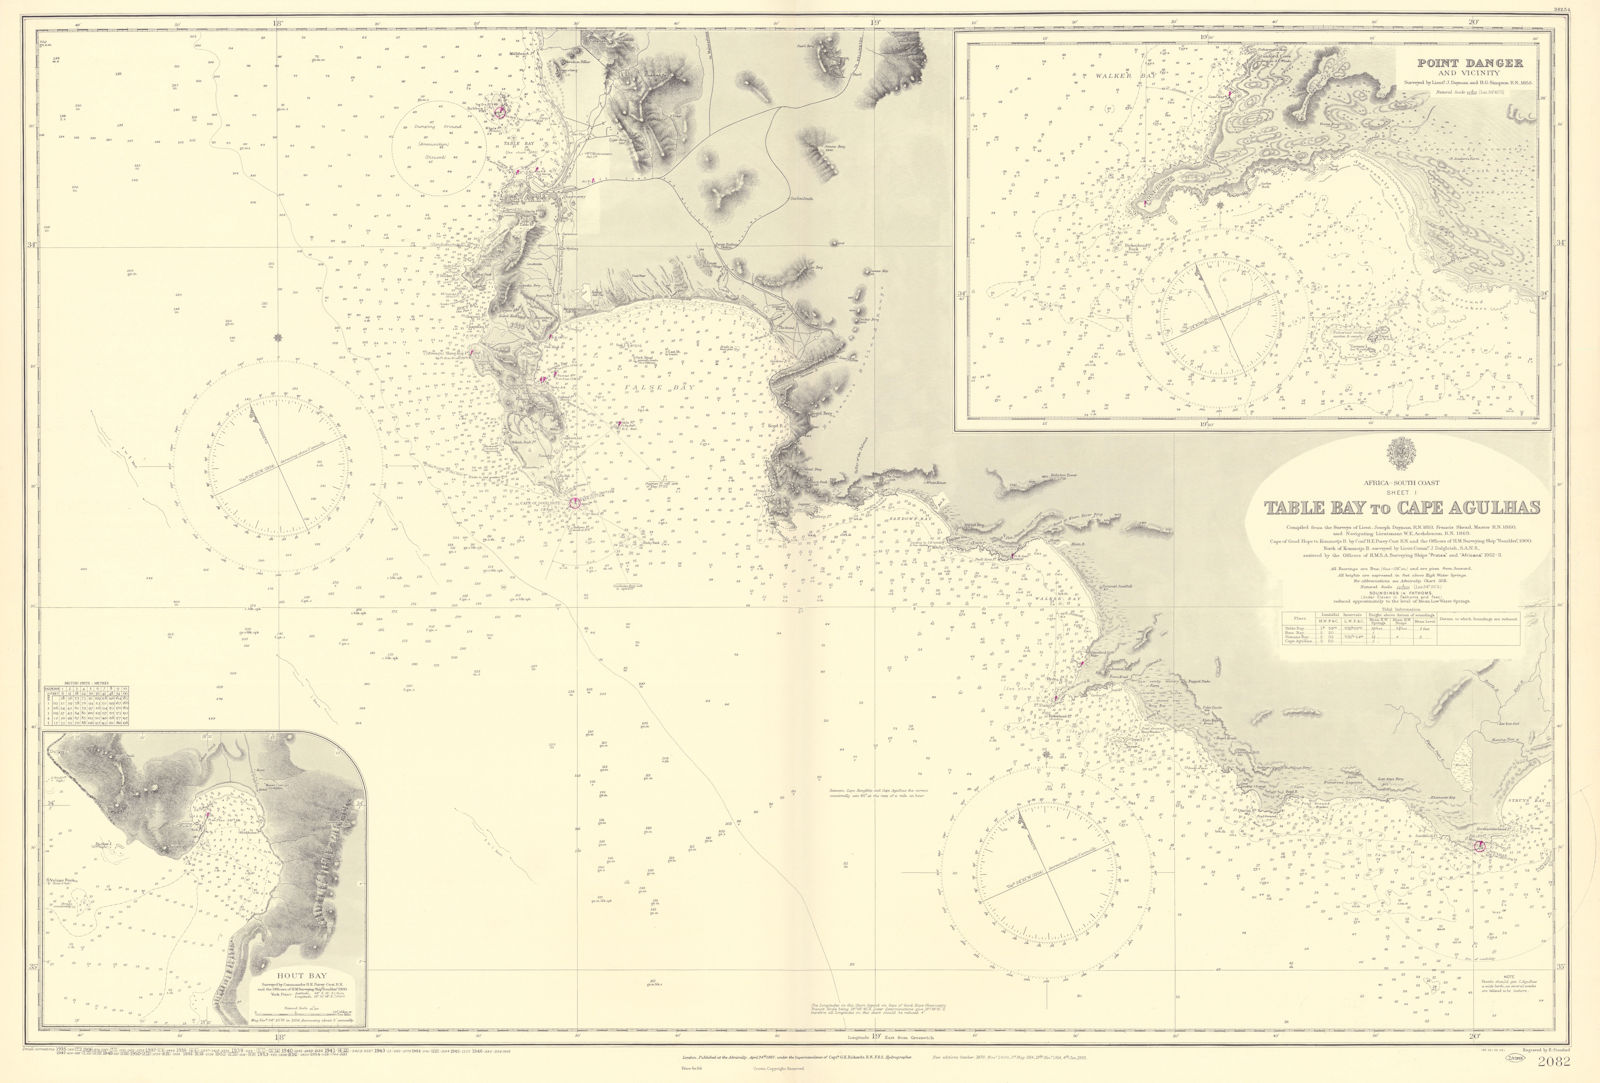 Cape Town Hout Table Bay Pt Danger South Africa ADMIRALTY chart 1867 (1954) map